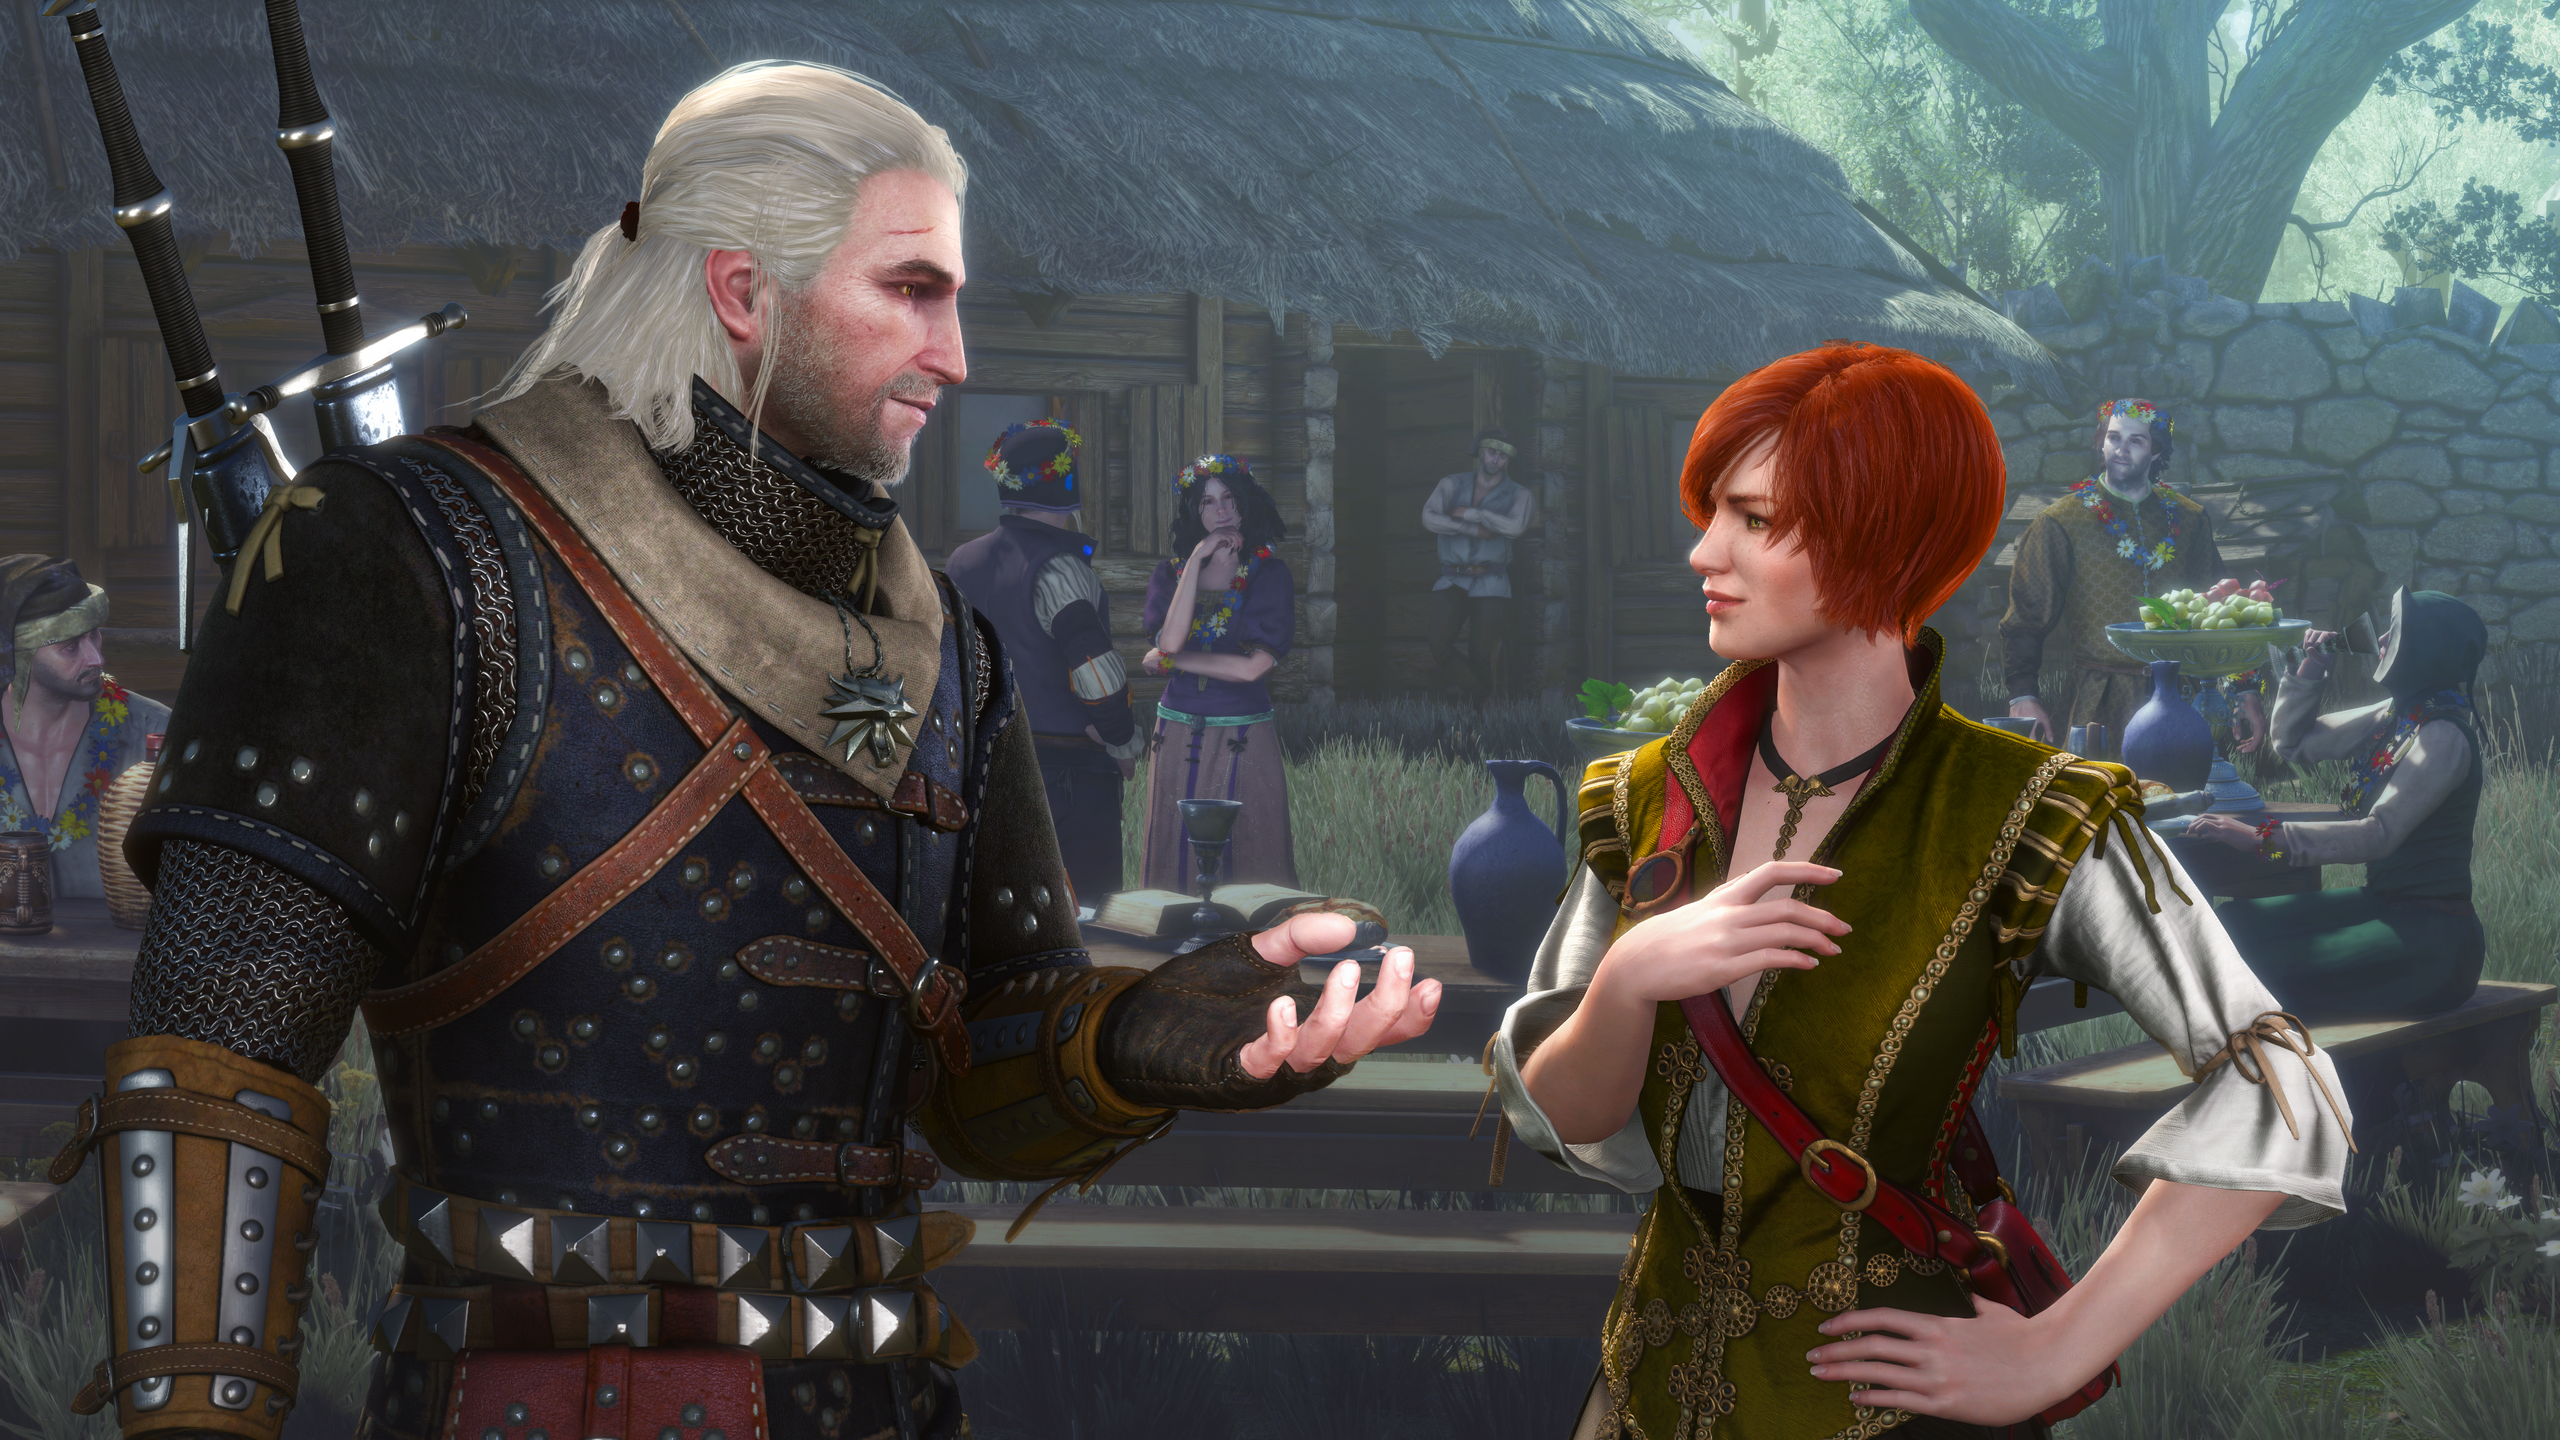 The Witcher The Witcher 3 Wild Hunt Geralt Of Rivia DLC Shani Video Games The Witcher 3 Wild Hunt He 2560x1440